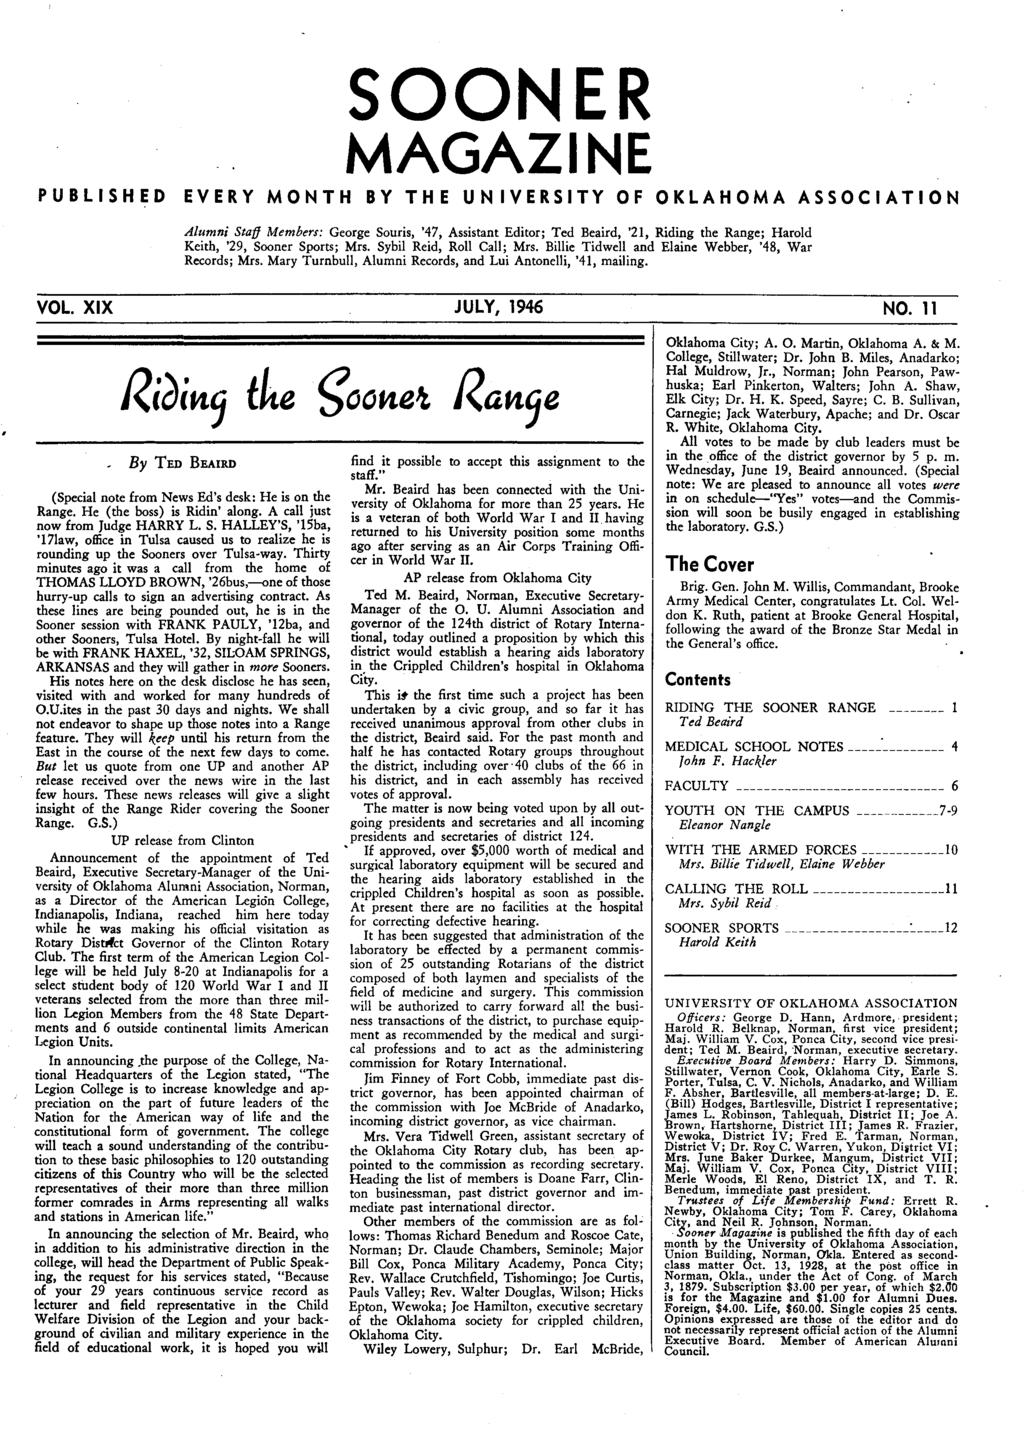 SOONER MAGAZINE PUBLISHED EVERY MONTH BY THE UNIVERSITY OF OKLAHOMA ASSOCIATION Alumni Staff Members : George Souris, '47, Assistant Editor ; Ted Beaird, '21, Riding the Range ; Harold Keith, '29,